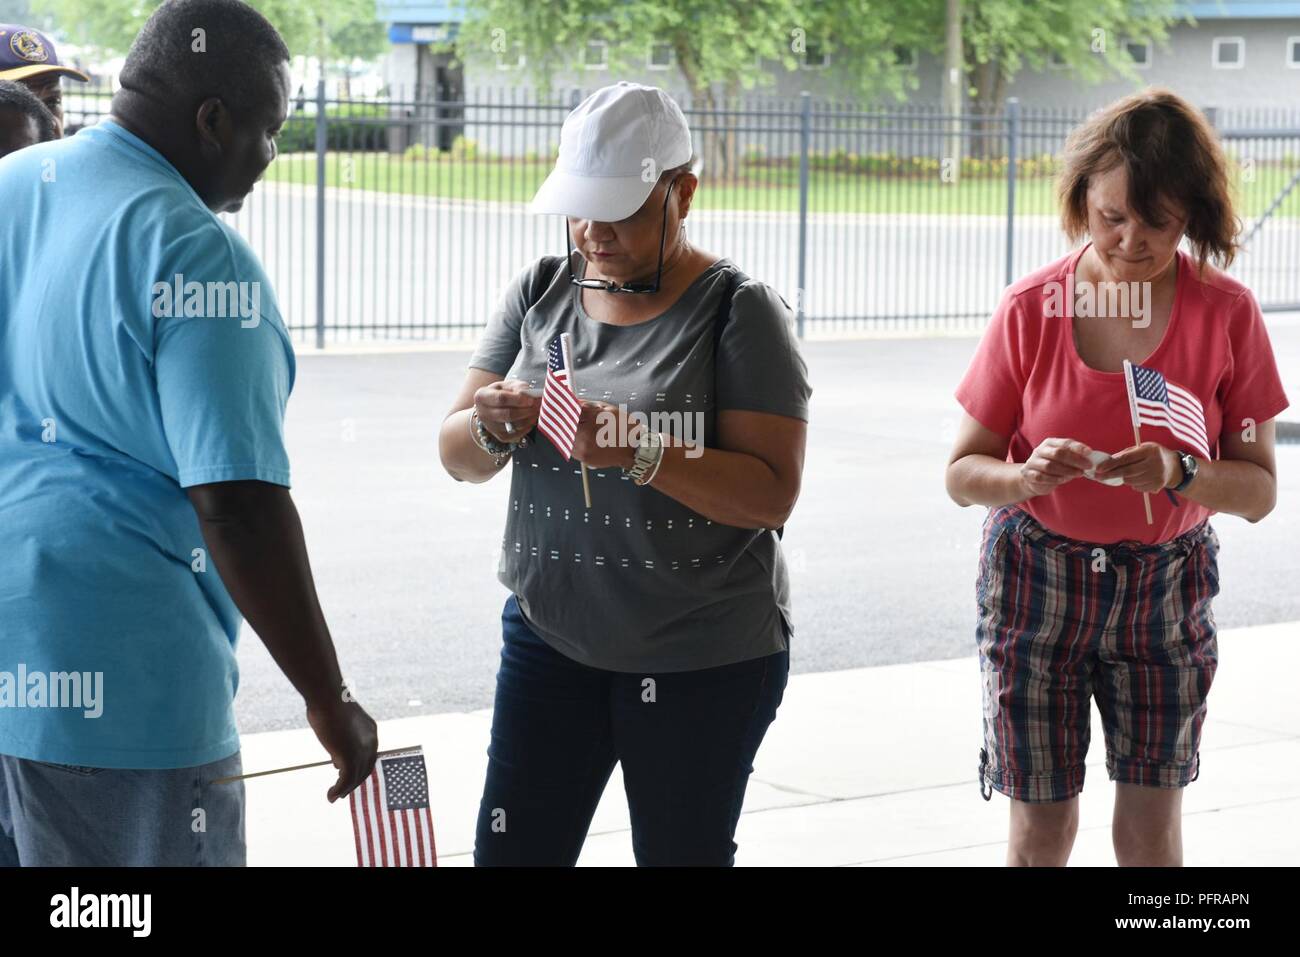 Addie Carmon (center), coordinator and owner of Evans Group Home in Greenville, N.C., assists some of her residents with stickers and flags at the Z-Max Pavilion, Charlotte N.C., during the annual Special Olympics Day at the Races, May 24, 2018. The Special Olympics Day at the Races is an annual celebration held at the Lowes Motor Speedway and is put on by Vangie Boswell and fourteen sponsors including the North Carolina Air National Guard (NCANG). Members of the NCANG help set-up the event and pass out mementos while mingling with State Special Olympians and their families. Stock Photo